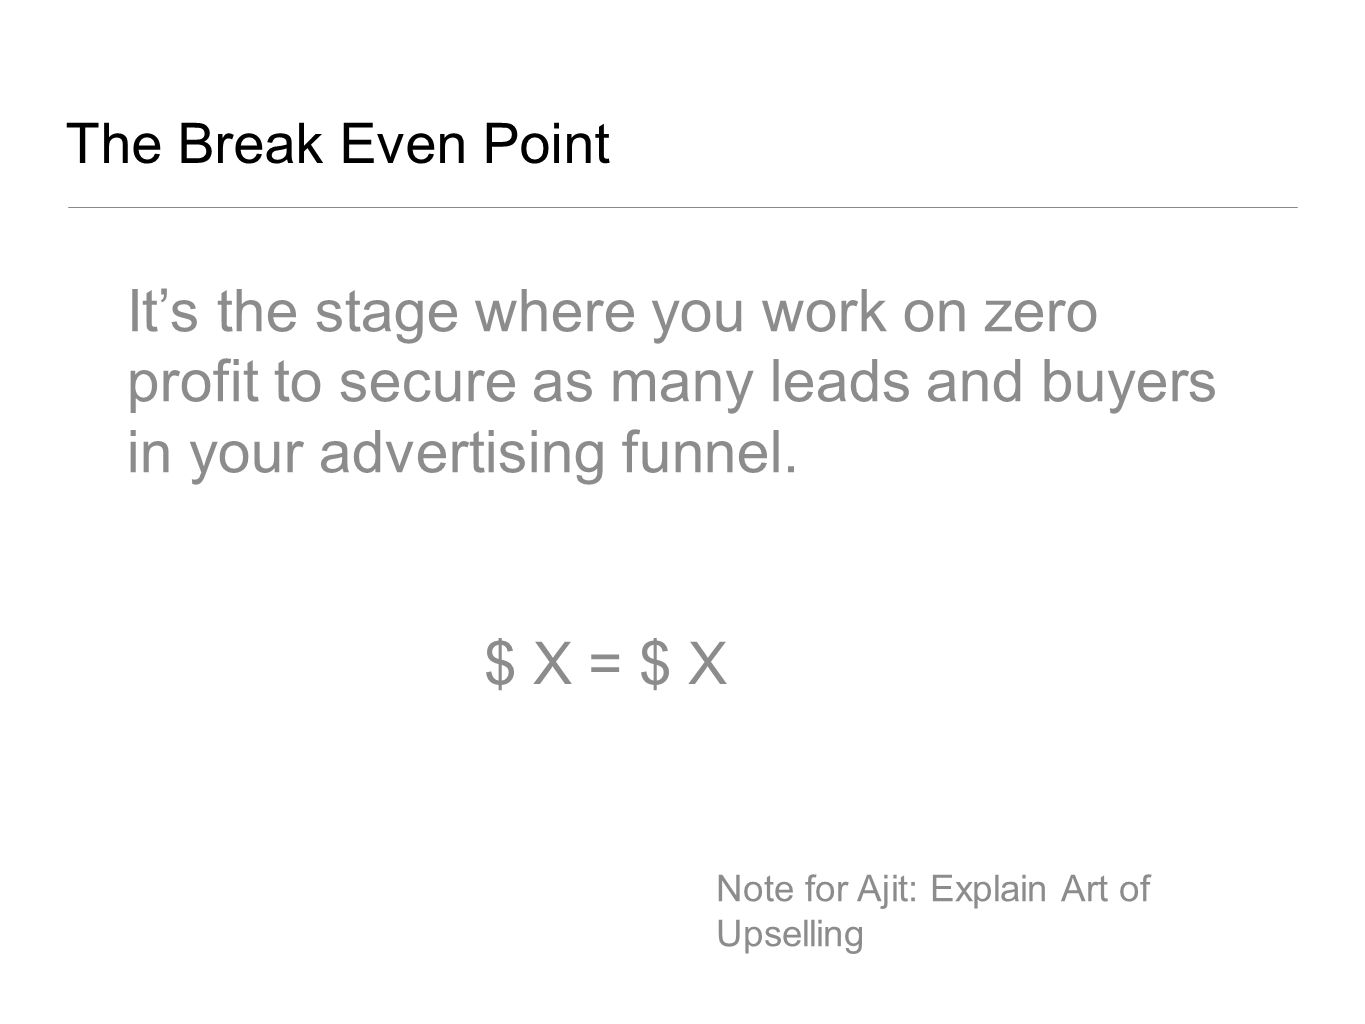 The Break Even Point It’s the stage where you work on zero profit to secure as many leads and buyers in your advertising funnel.